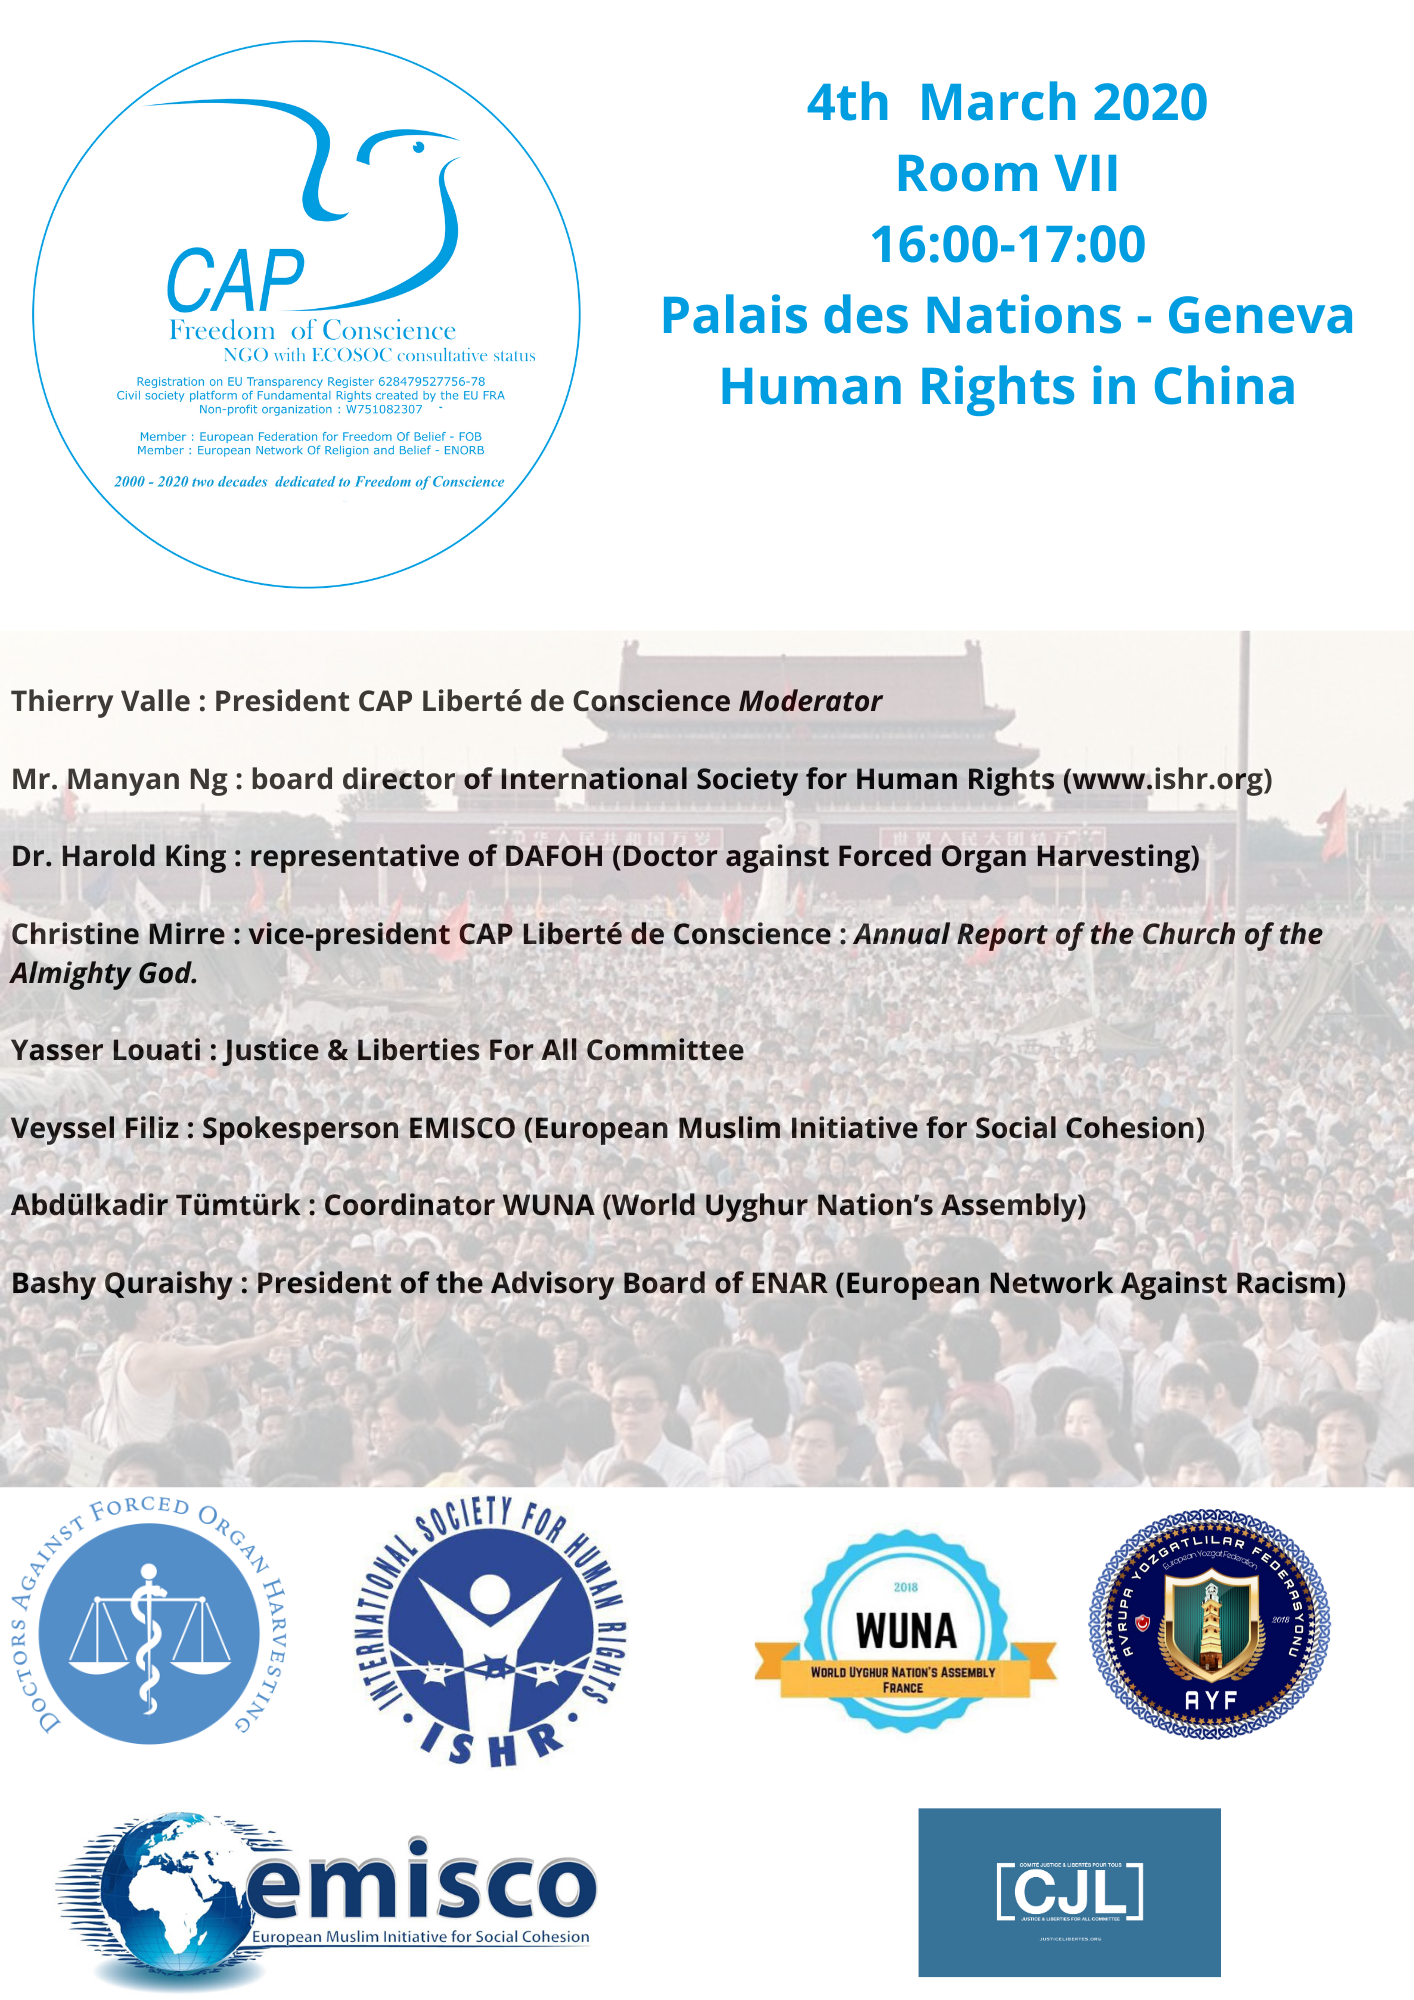 Human Rights Council 43rd : Human Rights in China